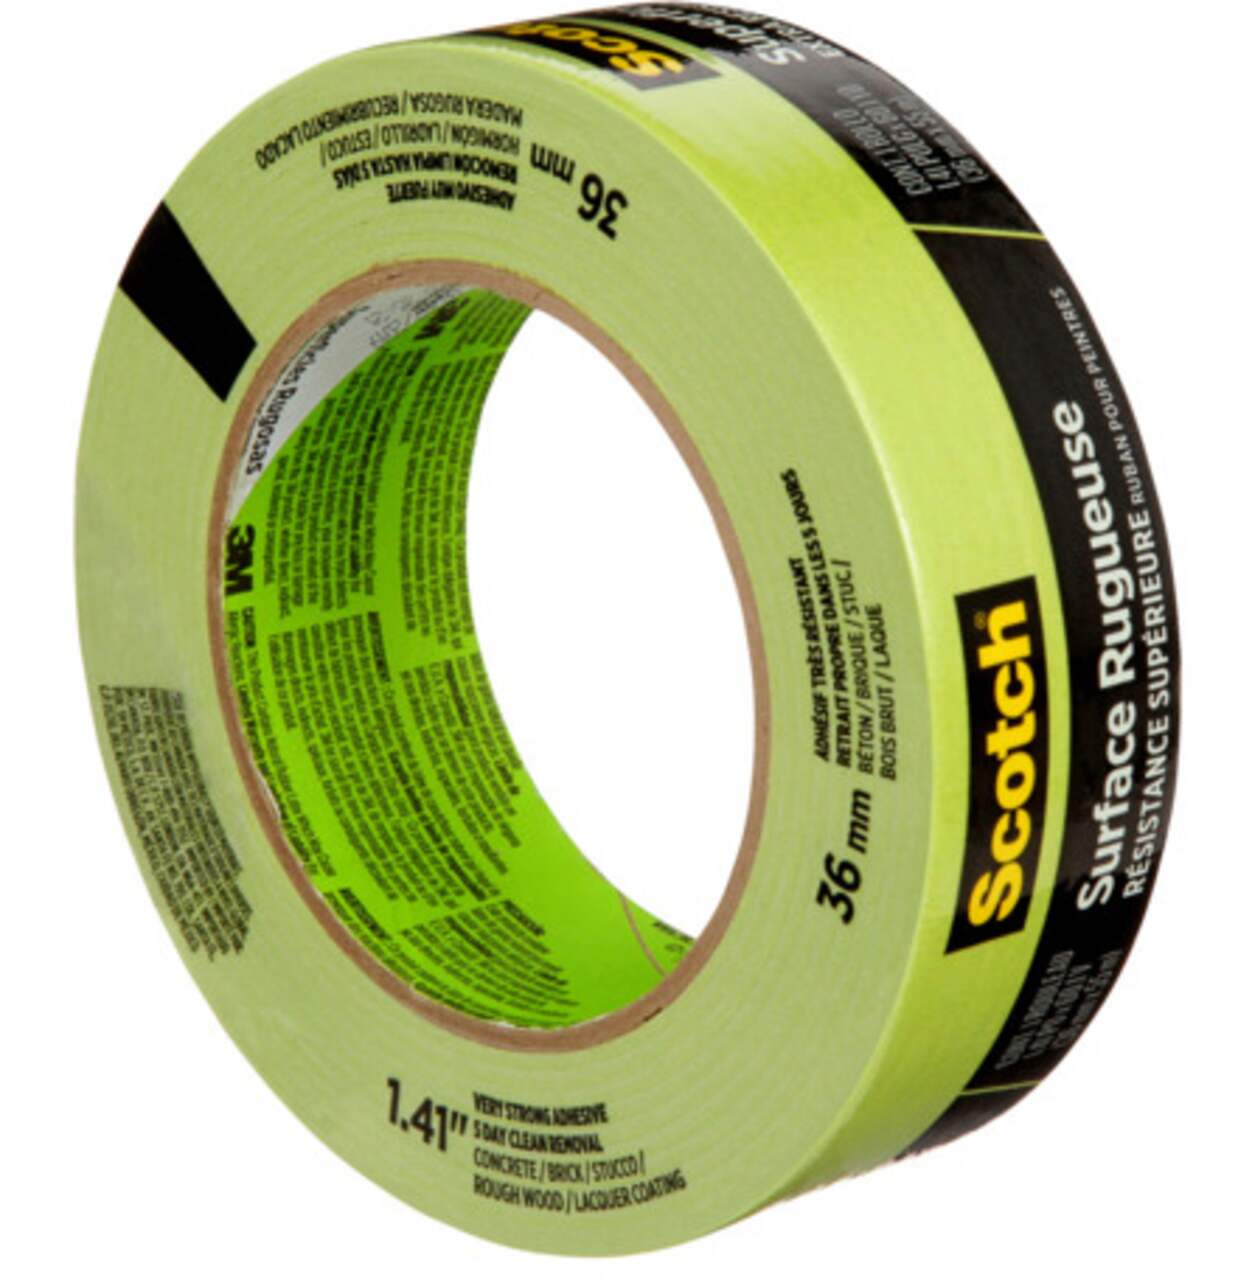 https://media-www.canadiantire.ca/product/fixing/paint/surface-prep-maintenance/0497020/scotch-rough-surface-painter-s-tape-1-5--14bac266-2302-45ce-b87f-f1b72e08435a.png?imdensity=1&imwidth=640&impolicy=mZoom